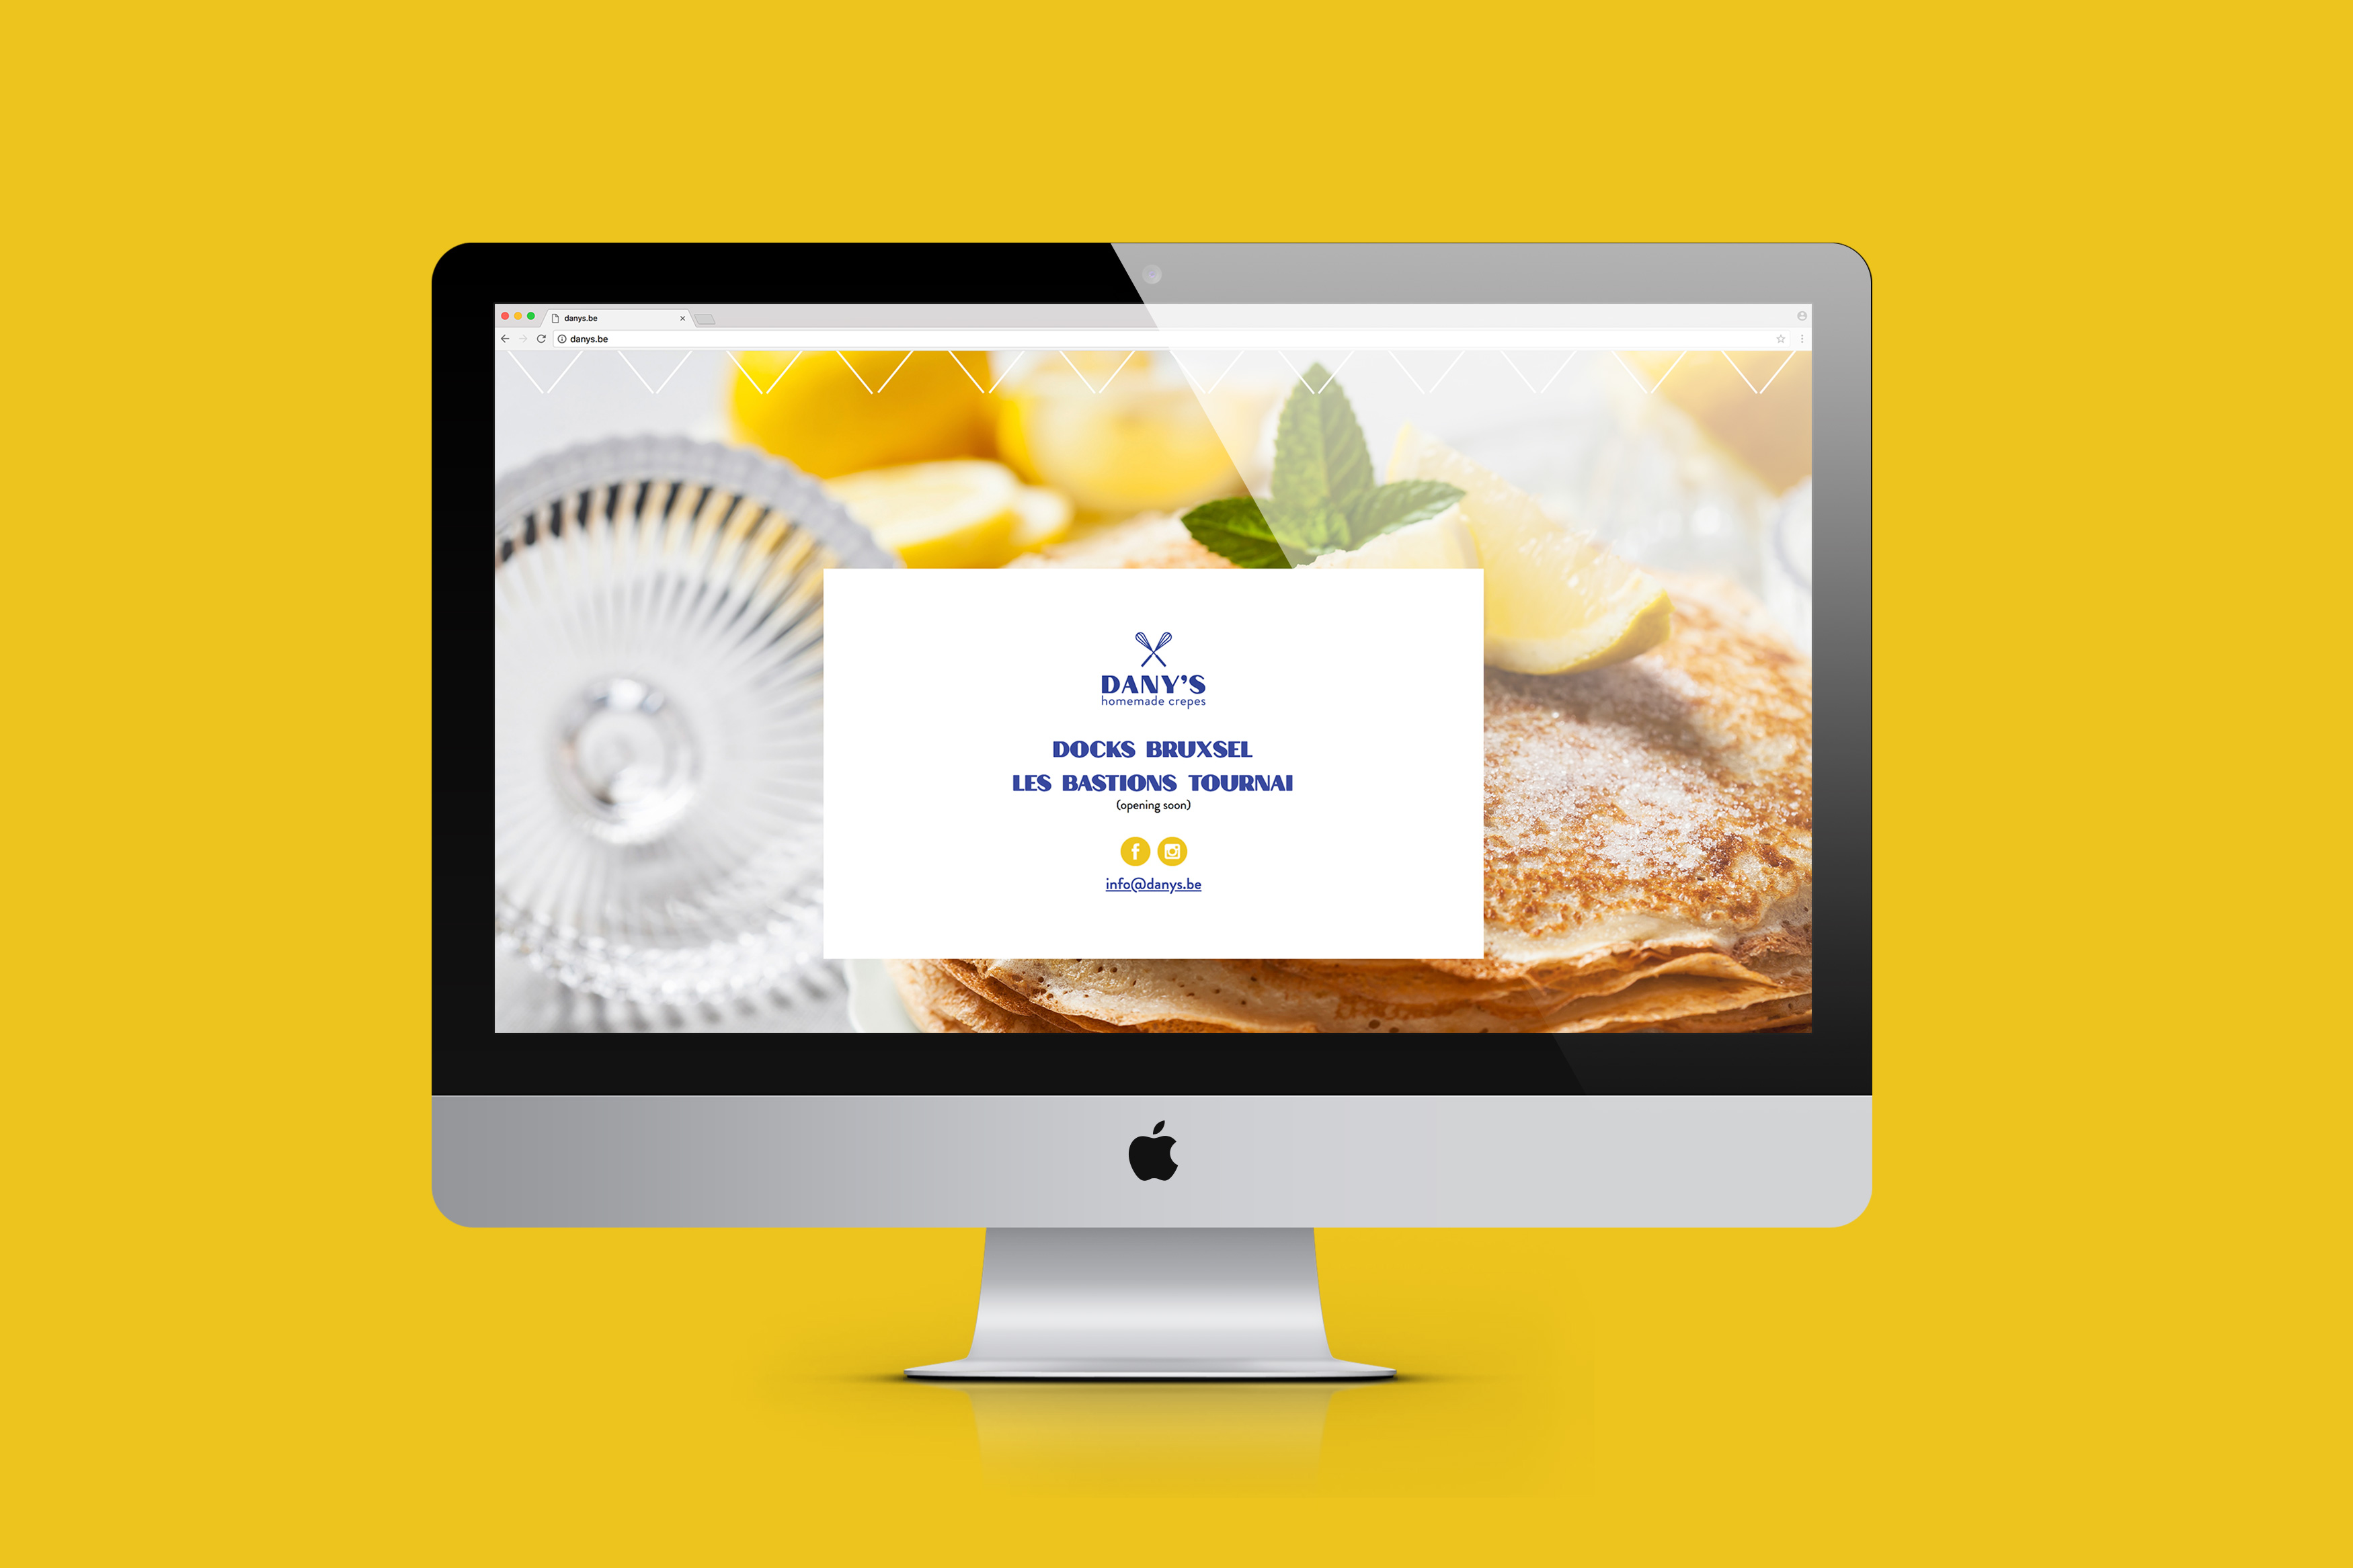 crèpes, food corner, mall, dany's, Studio fiftyfifty, pâtisserie, lunch, brunch, graphic identity, webdesign